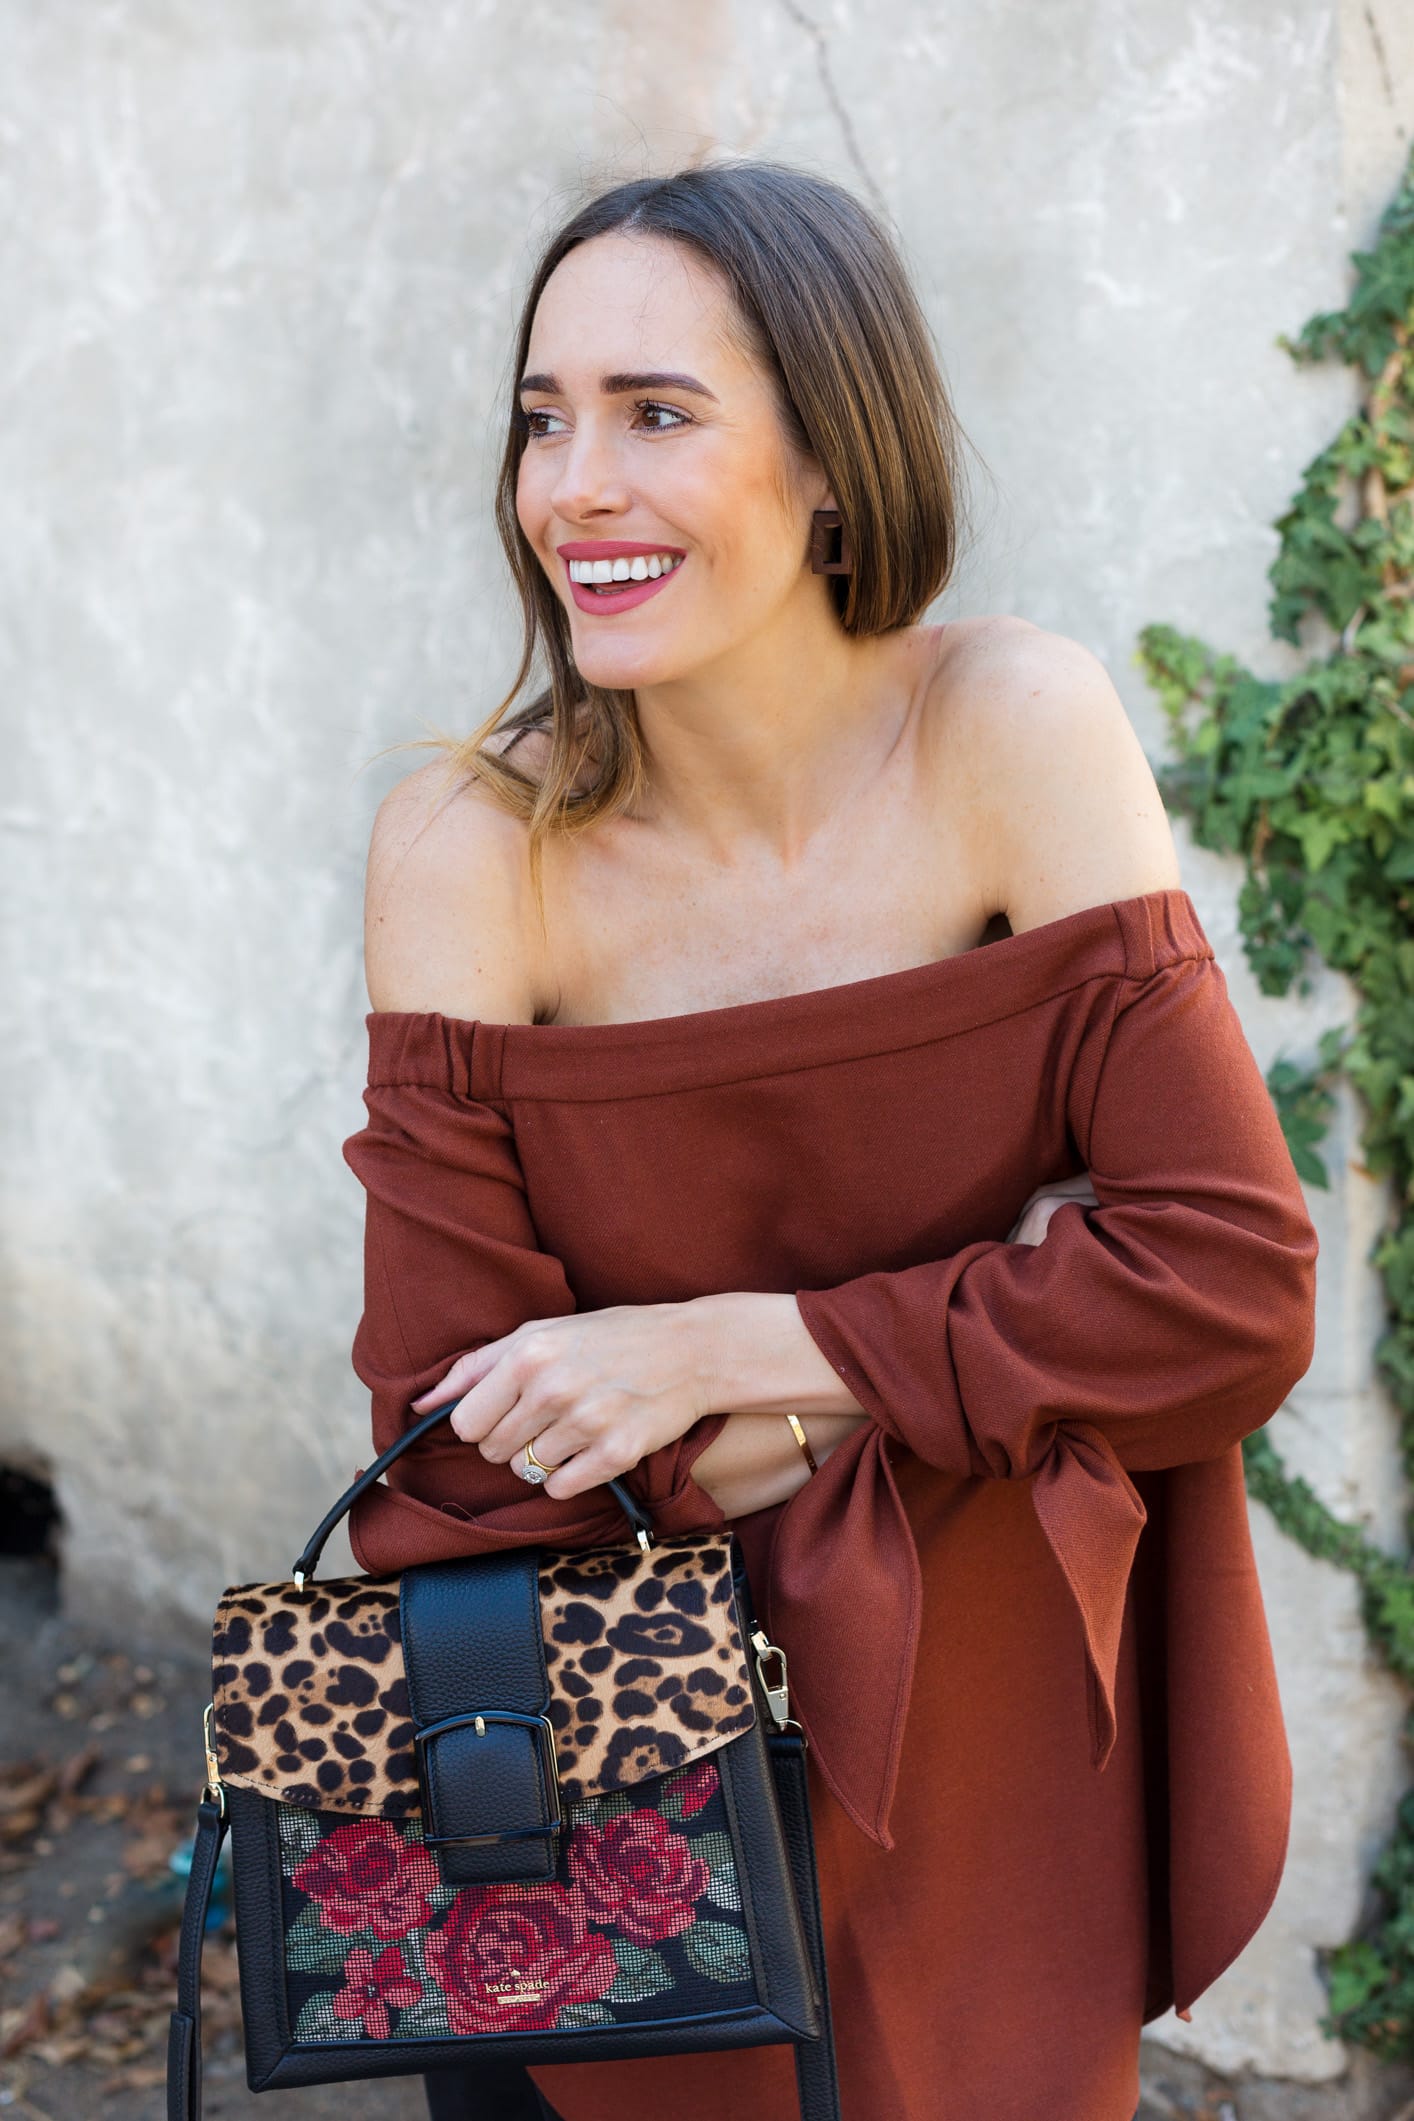 Louise Roe wearing leopard embroidered Kate Spade handbag for Fall